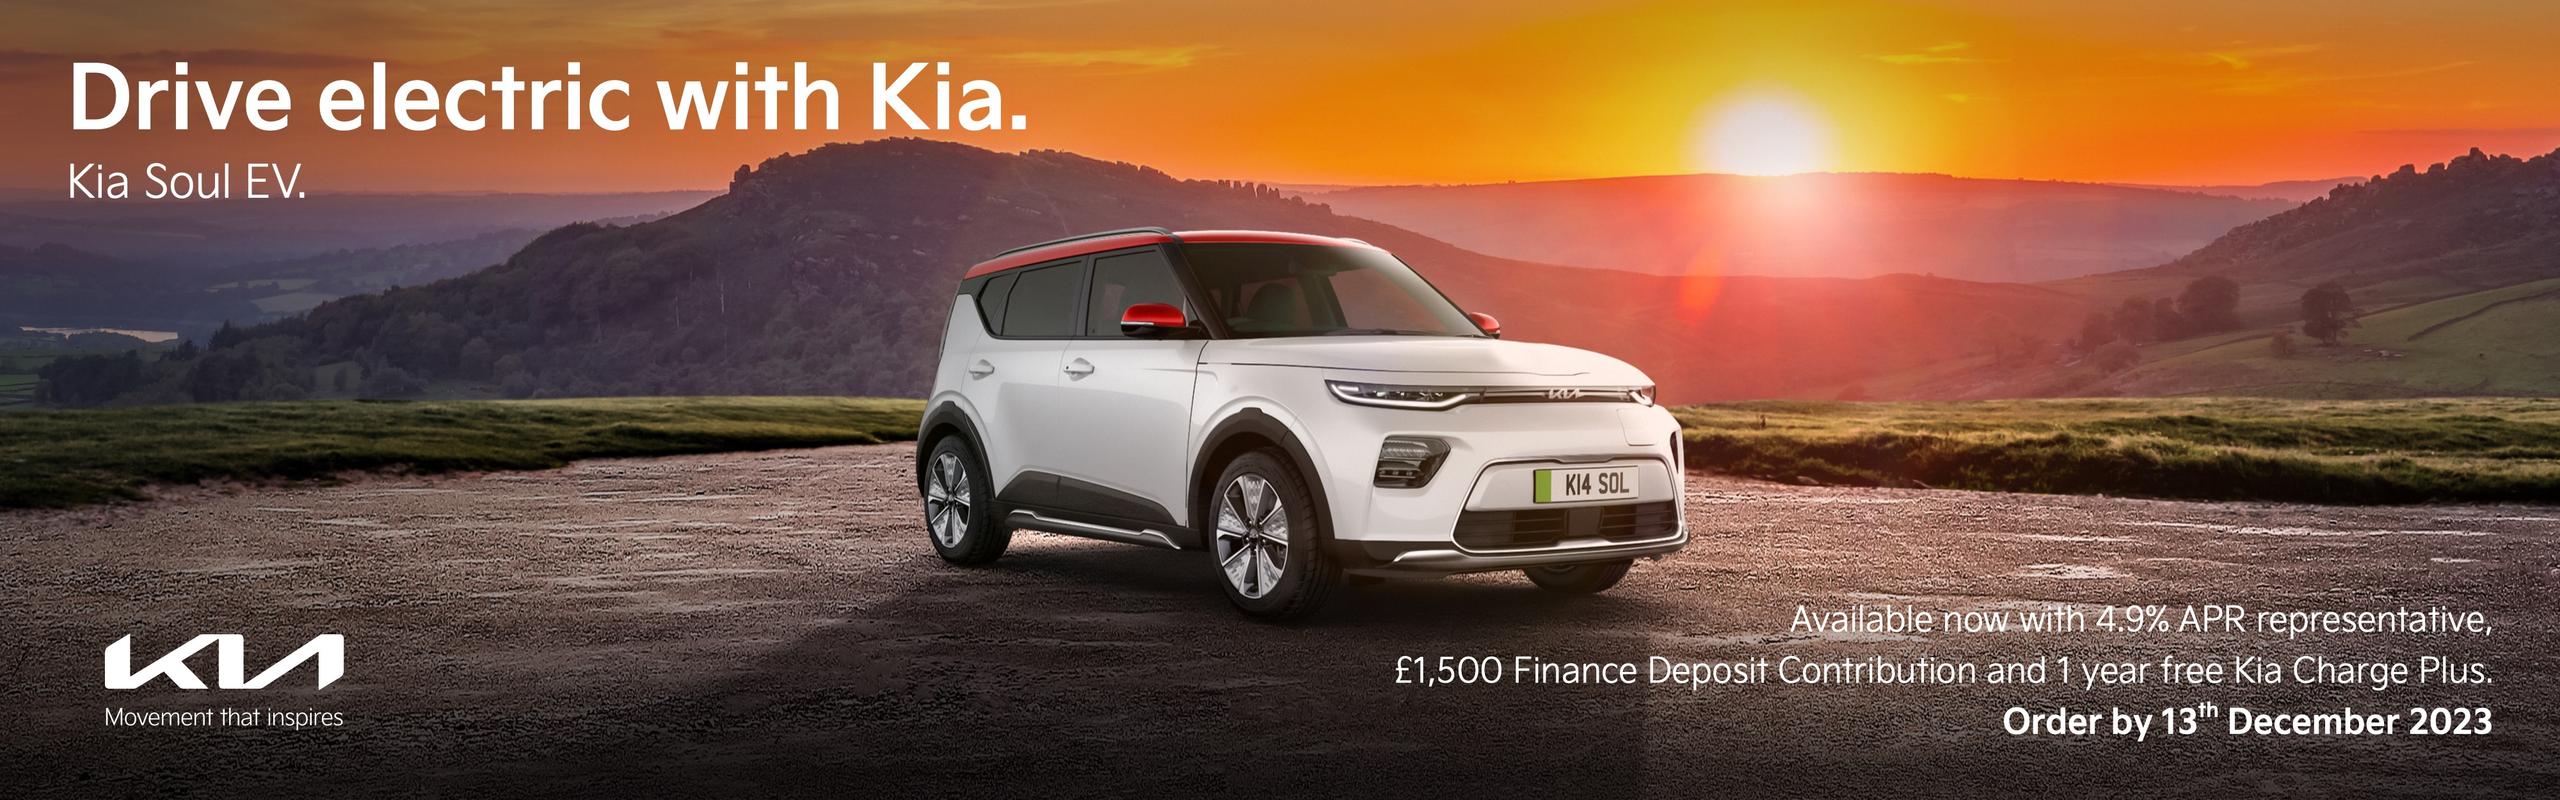 Take the lead. Drive electric. Award-winning electric cars. With a range of up to 328 miles, charging time as little as 18 minutes from 10 to 80%, and our industry leading 7-year warranty.